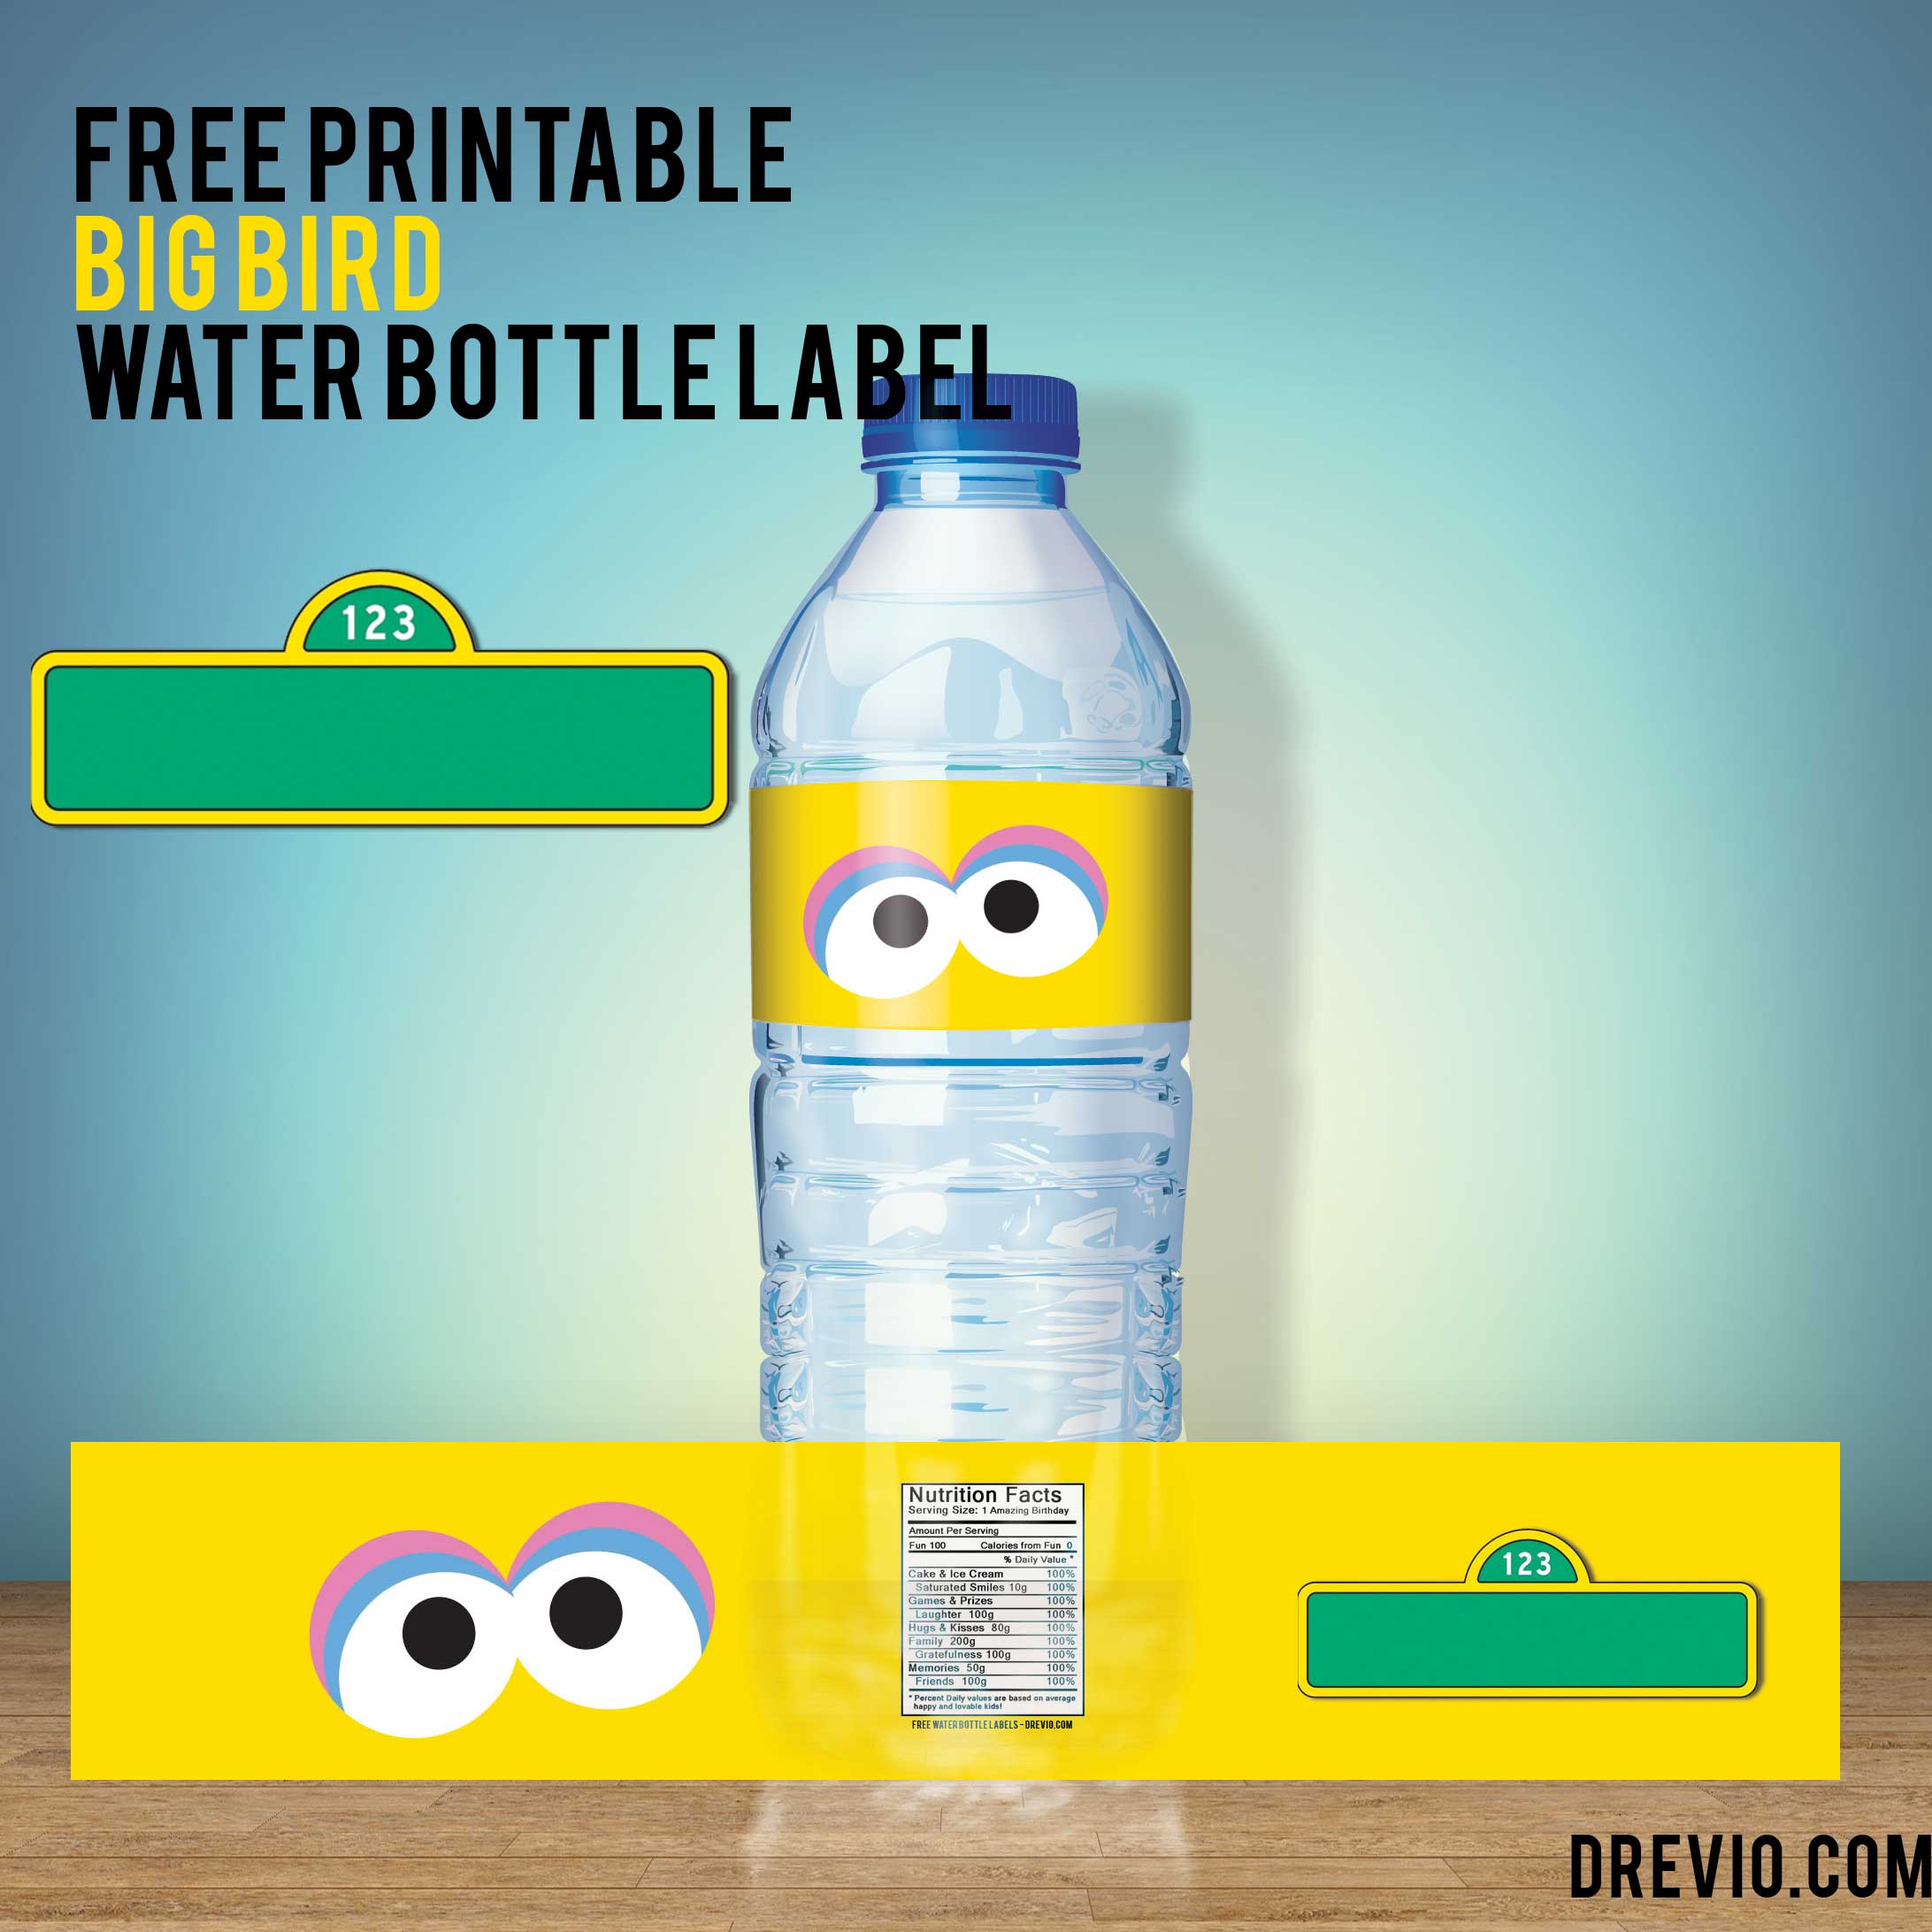 FREE-Printable-Big-Bird-Water-Bottle-Label-Preview